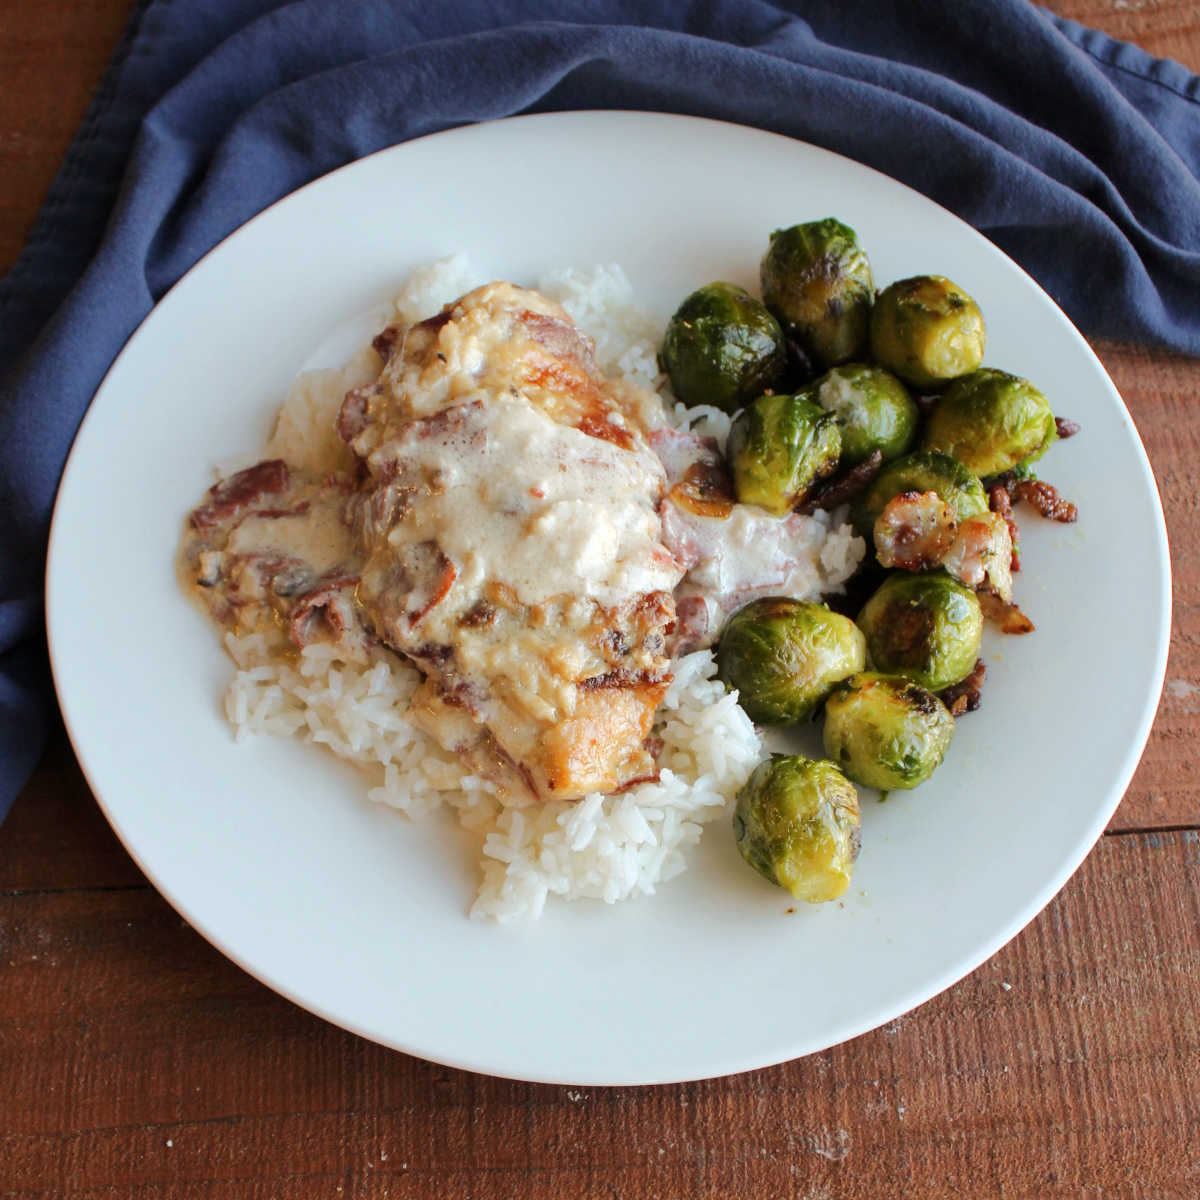 Dinner plate with bacon wrapped chicken breast in creamy sauce served over rice next to a helping of roasted brussels sprouts.